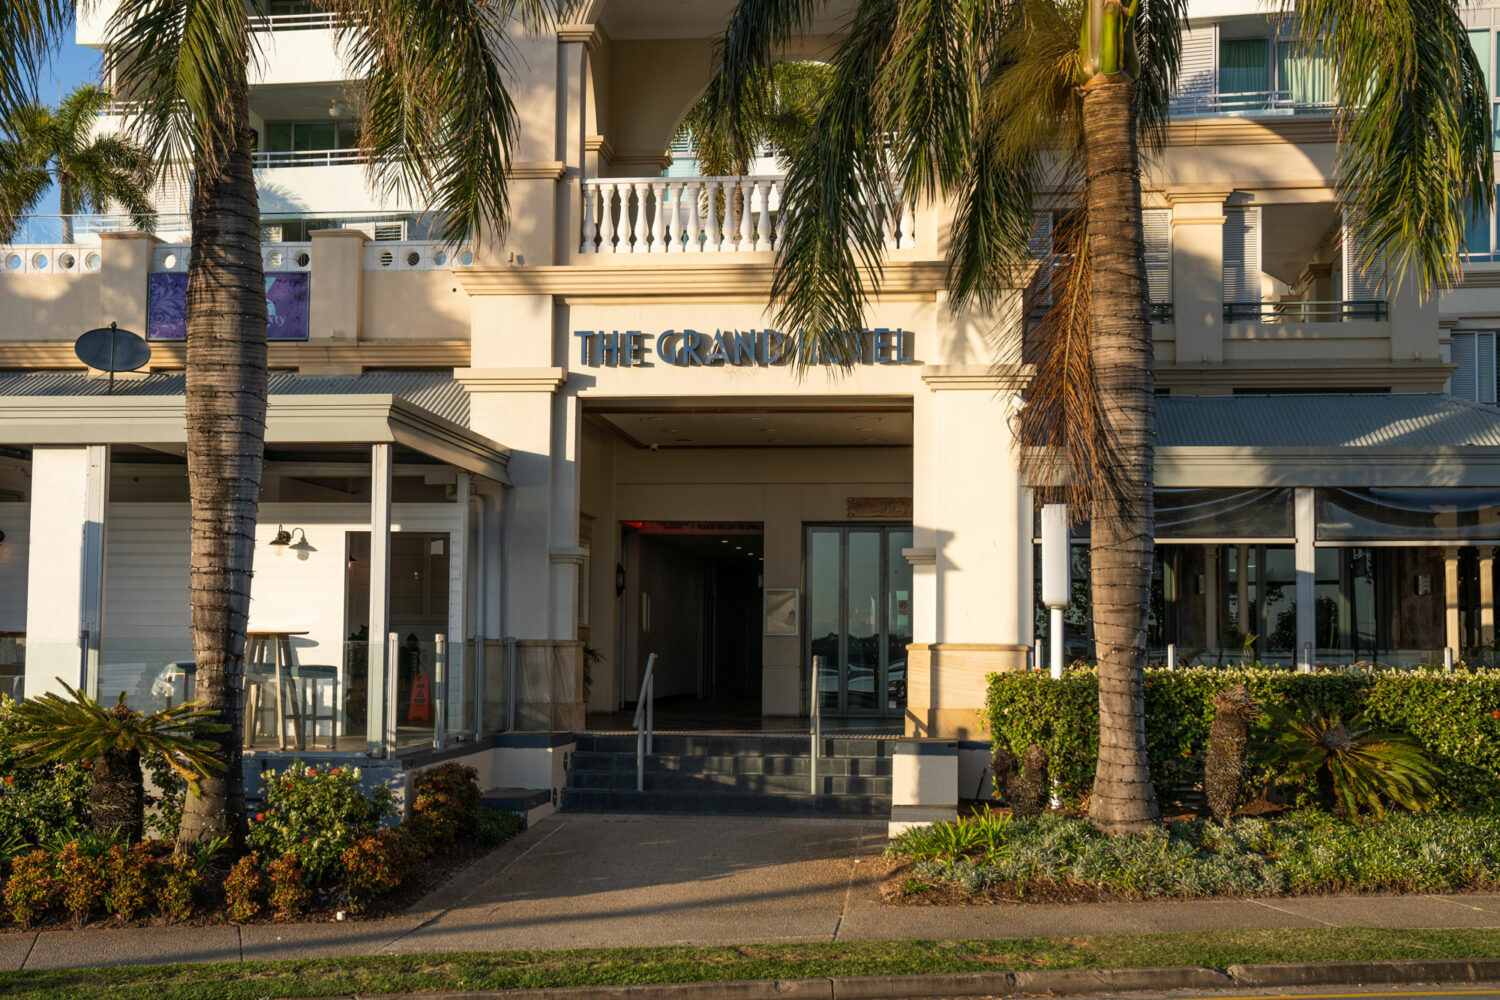 The entryway to "The Grand Hotel" building with large square columns and sign above the entrance within the Labrador lifestyle precinct. There are palm trees in the foreground and a few short steps from the footpath up to the door. It looks like an inviting, tropical oasis that could be the perfect place to retire.